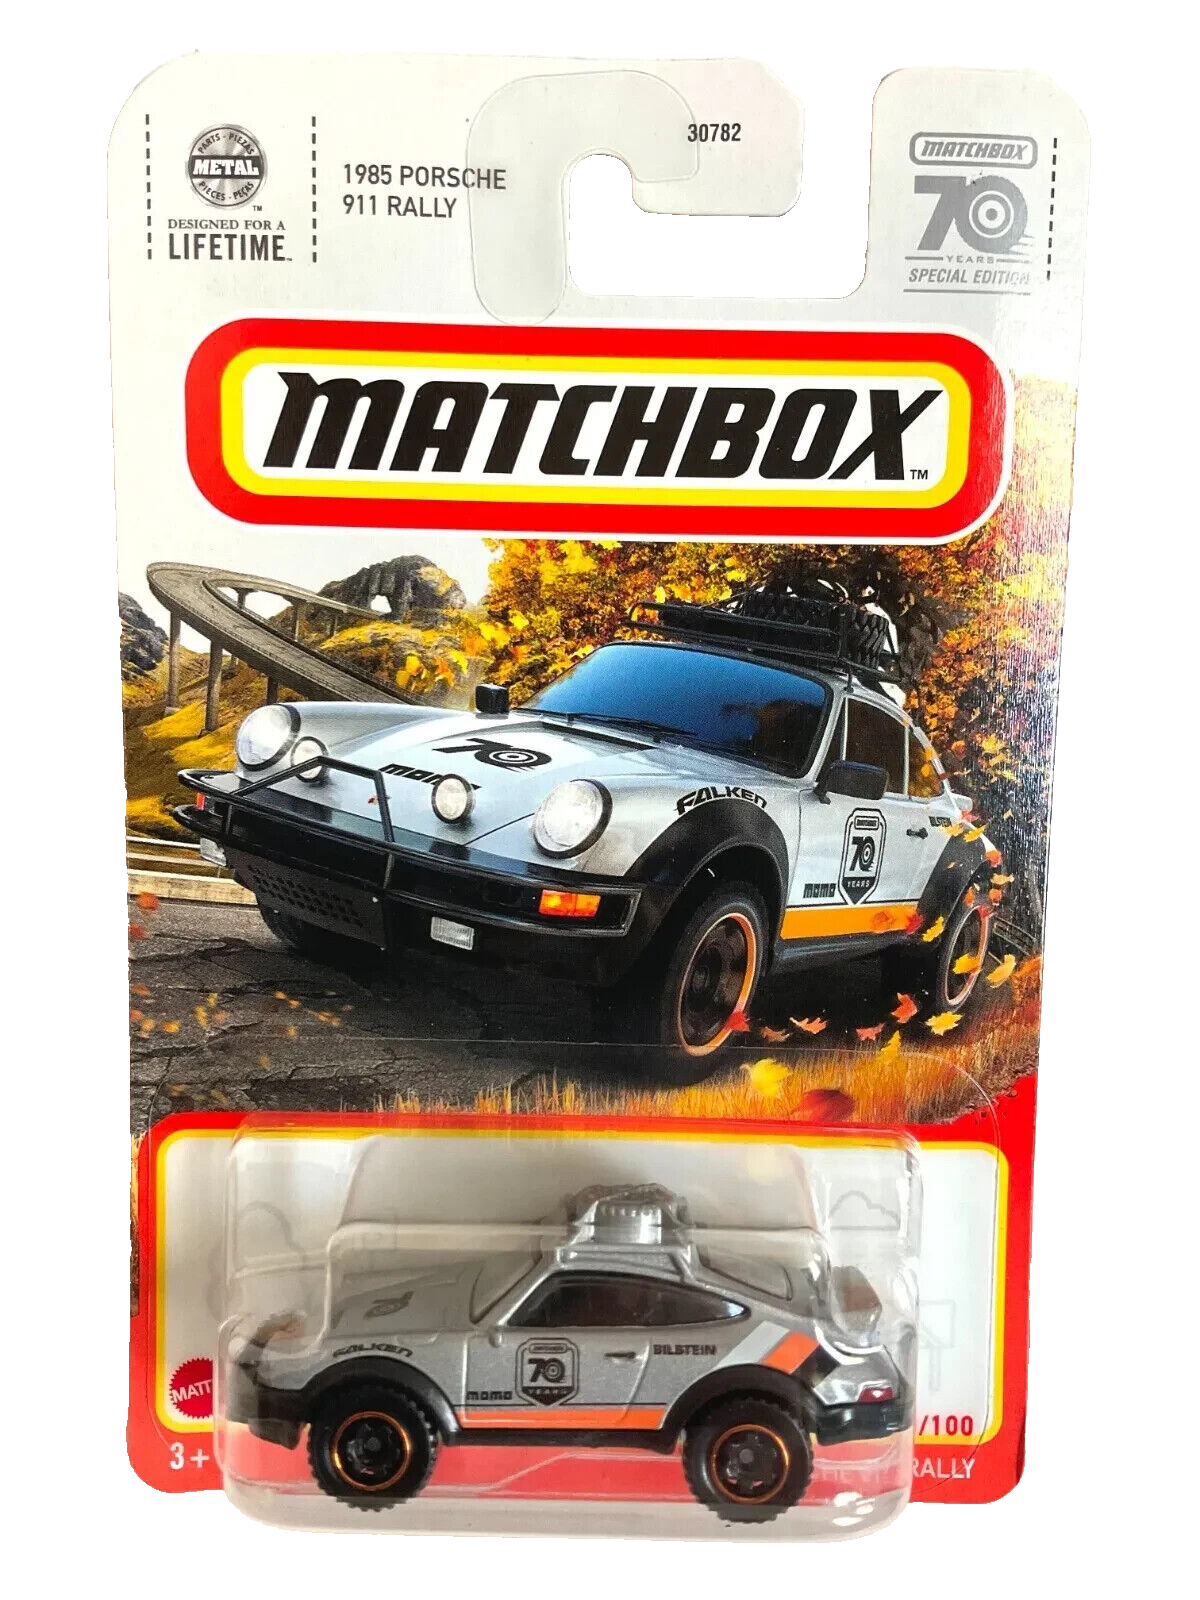 Primary image for Matchbox 1985 Porsche 911 Rally 70 Years Special Edition 2023 Matchbox